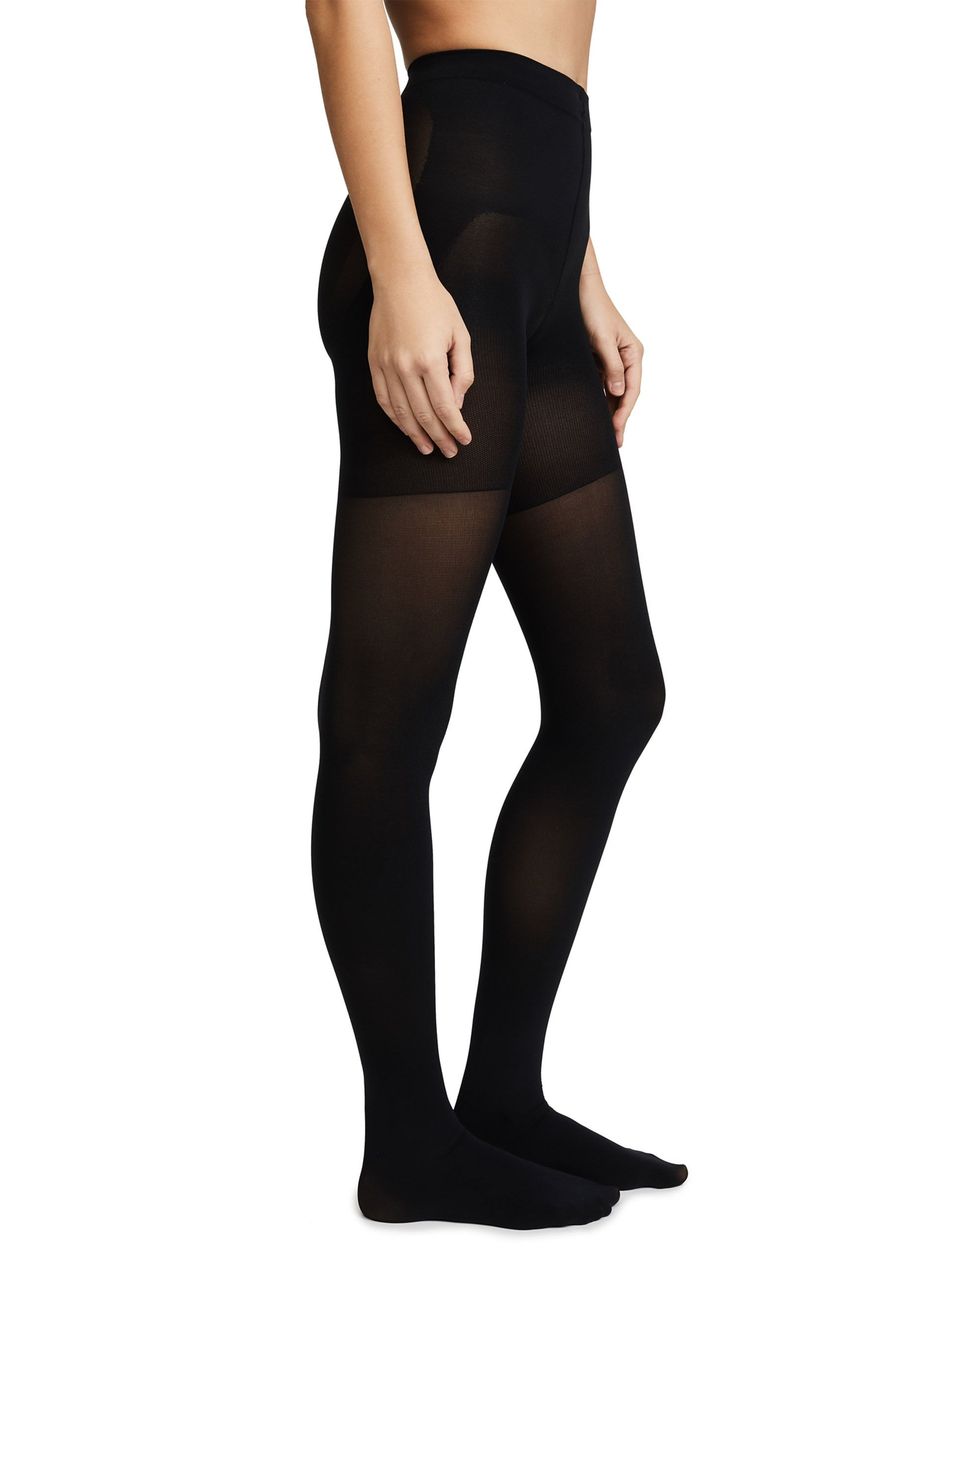 Fall Fashion MVP: Opaque Black Tights from Just My Size